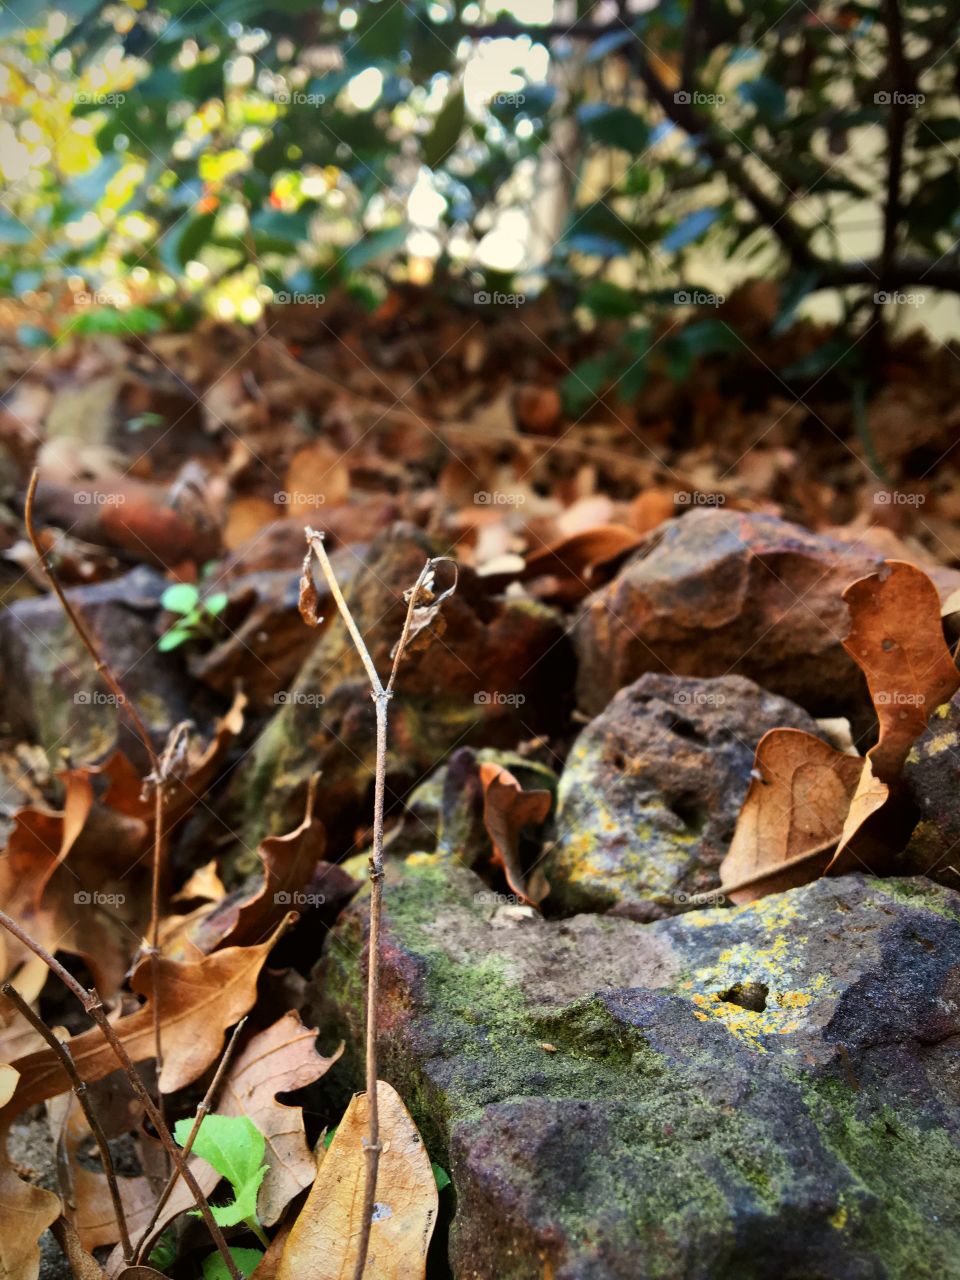 Rocks surrounded by leaves 